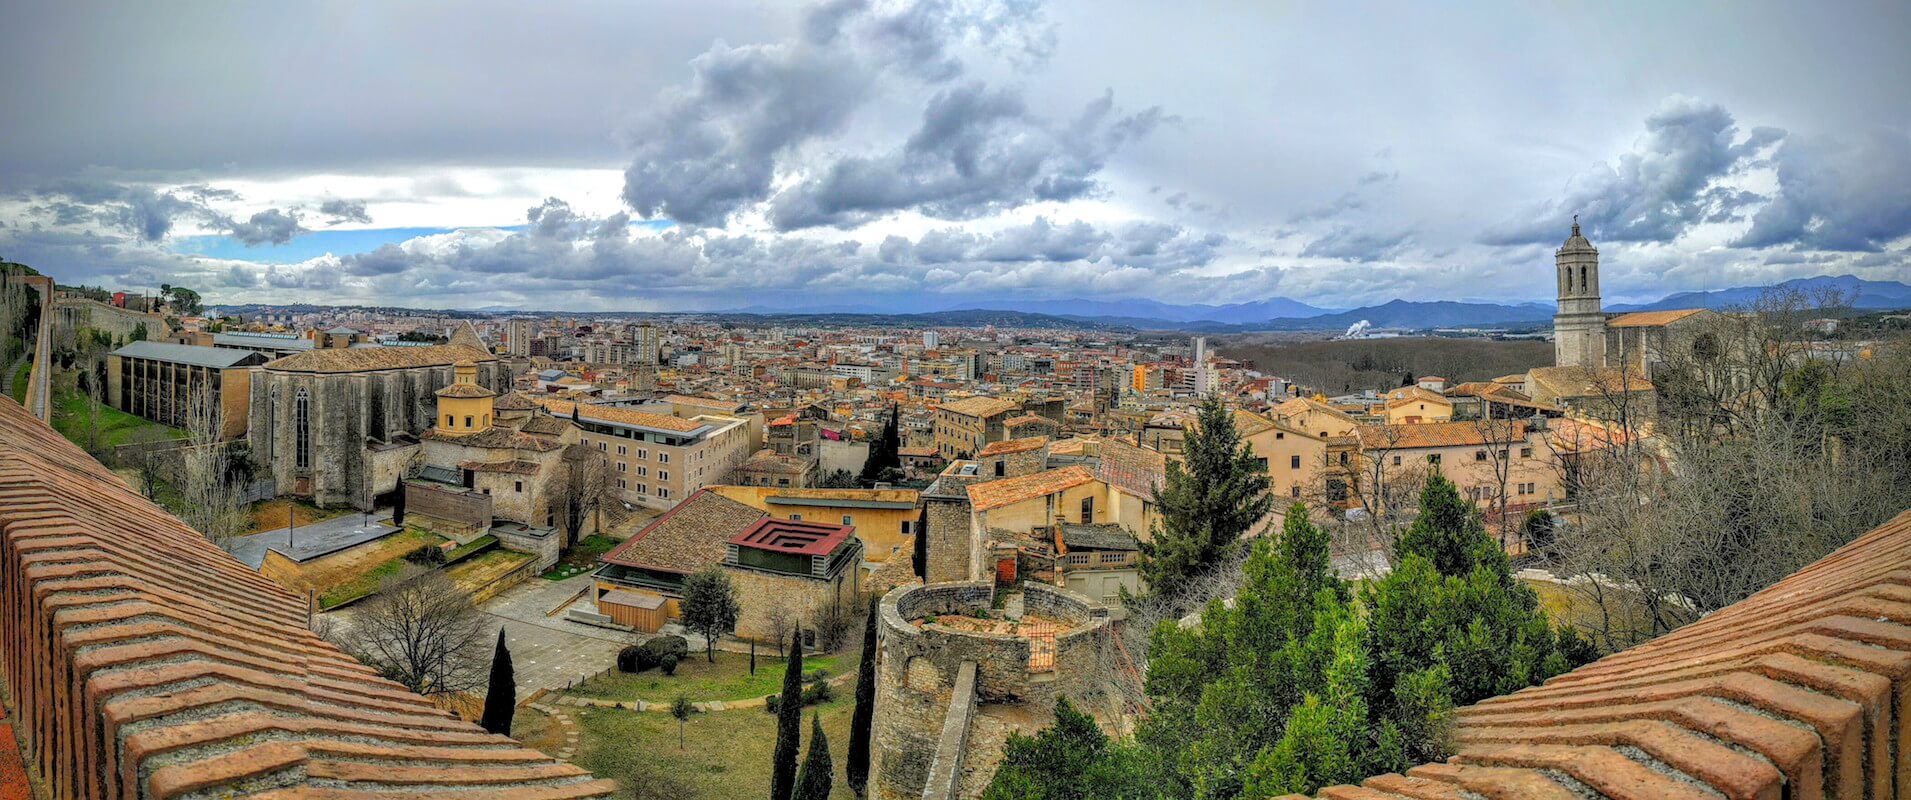 Girona from the battlements